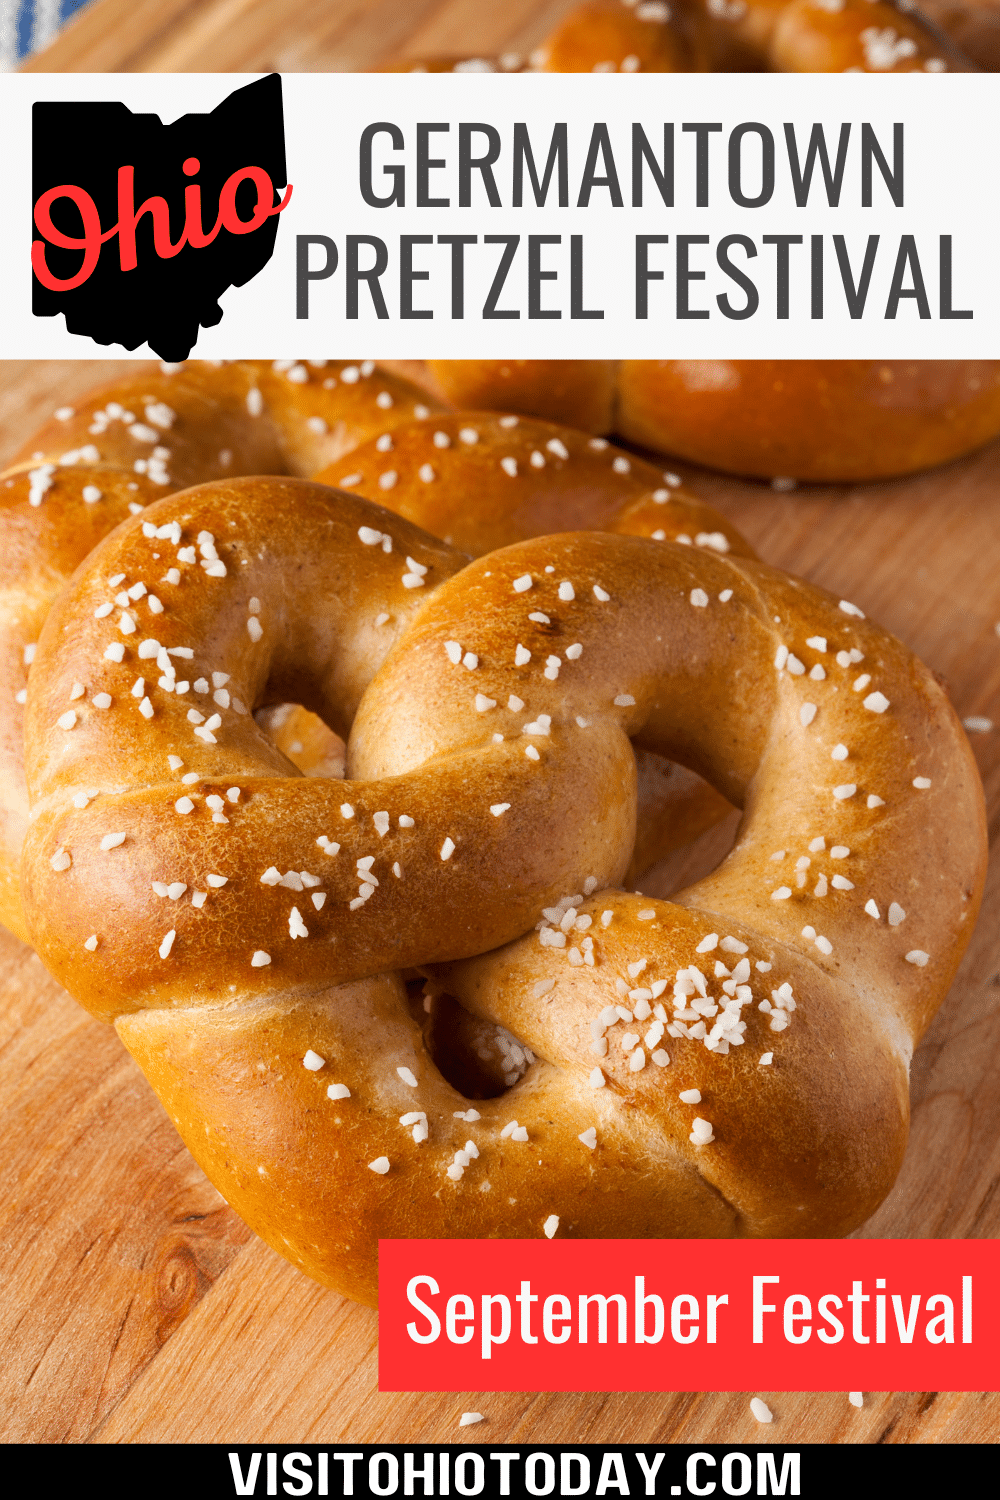 The Germantown Pretzel Festival takes place in the Veterans Memorial Park, Germantown over two days – Saturday and Sunday, September 23 and 24, 2023.